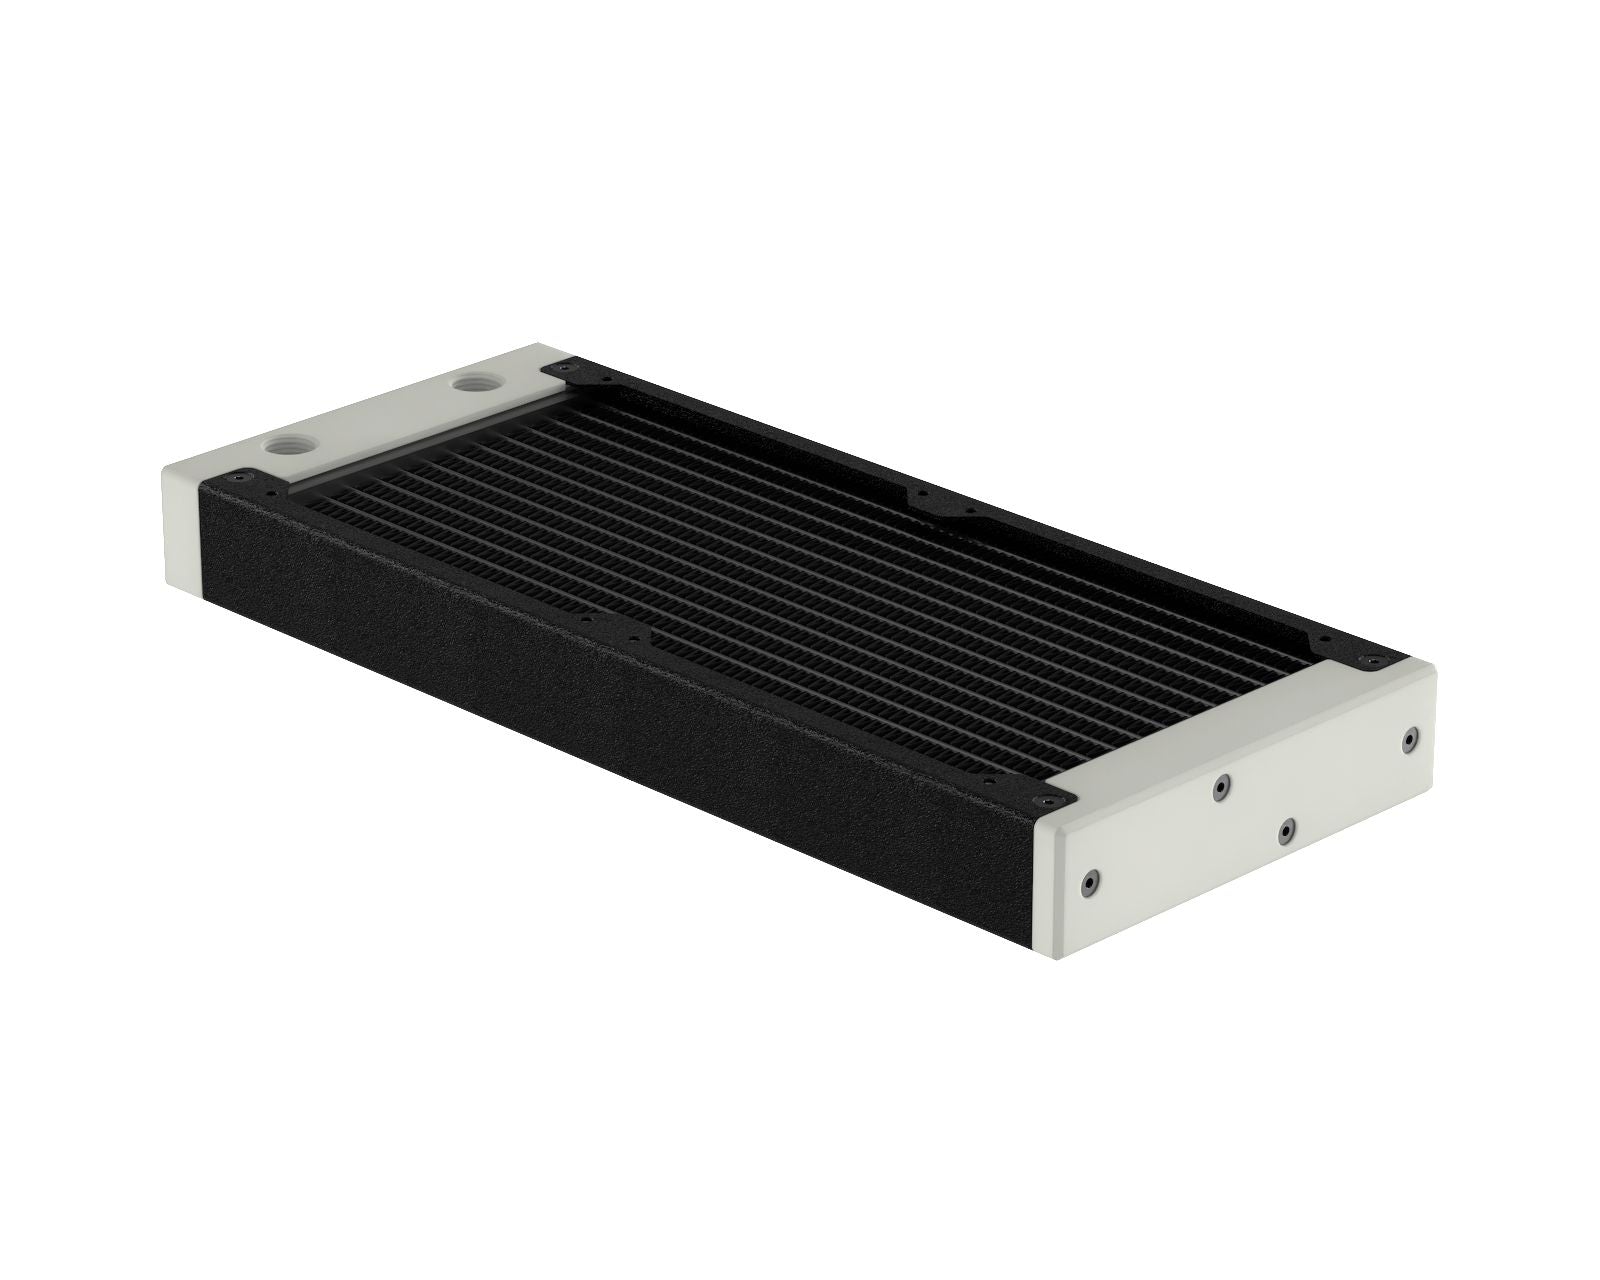 PrimoChill 240SL (30mm) EXIMO Modular Radiator, White POM, 2x120mm, Dual Fan (R-SL-W24) Available in 20+ Colors, Assembled in USA and Custom Watercooling Loop Ready - TX Matte Black